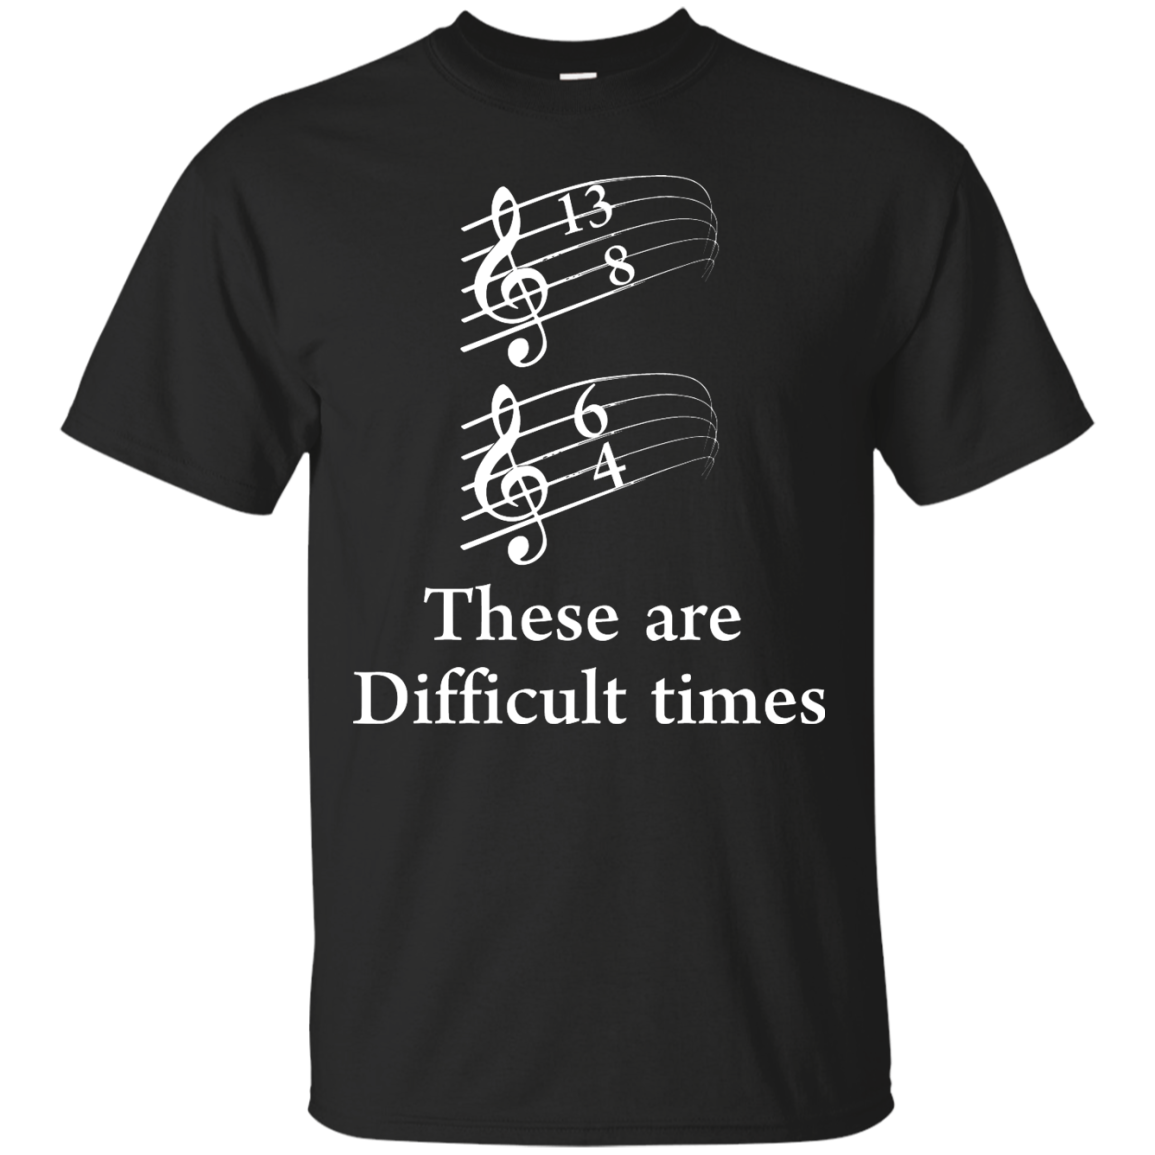 Funny Shirts for musicians - These are difficult times T-shirt,Tank top ...